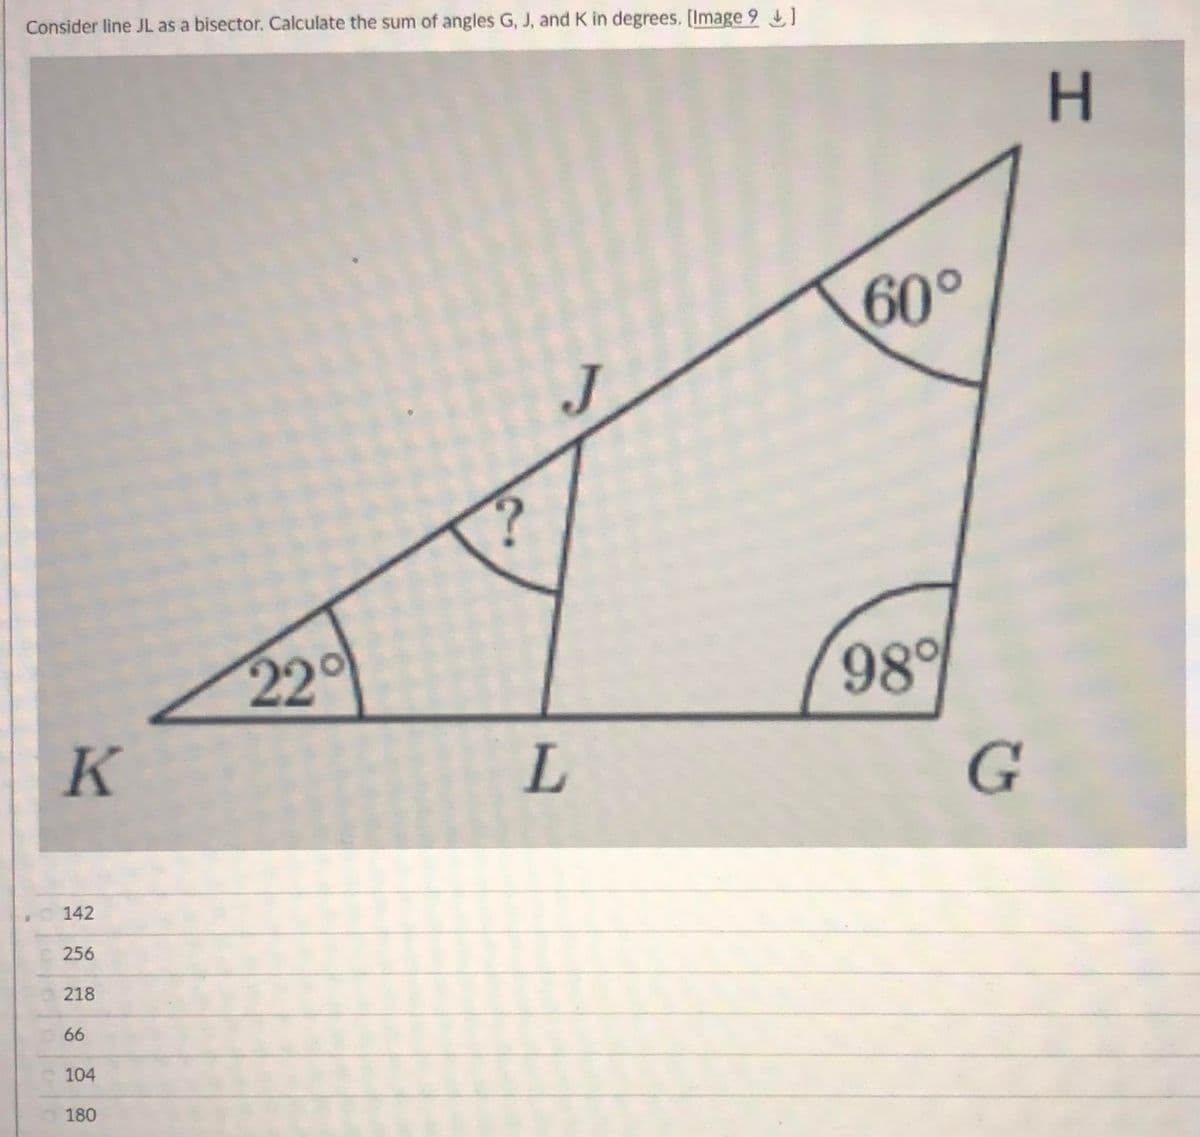 Consider line JL as a bisector. Calculate the sum of angles G, J, and K in degrees. (Image 9 1
60°
J
22°
98%
L
G
142
256
218
66
104
180
